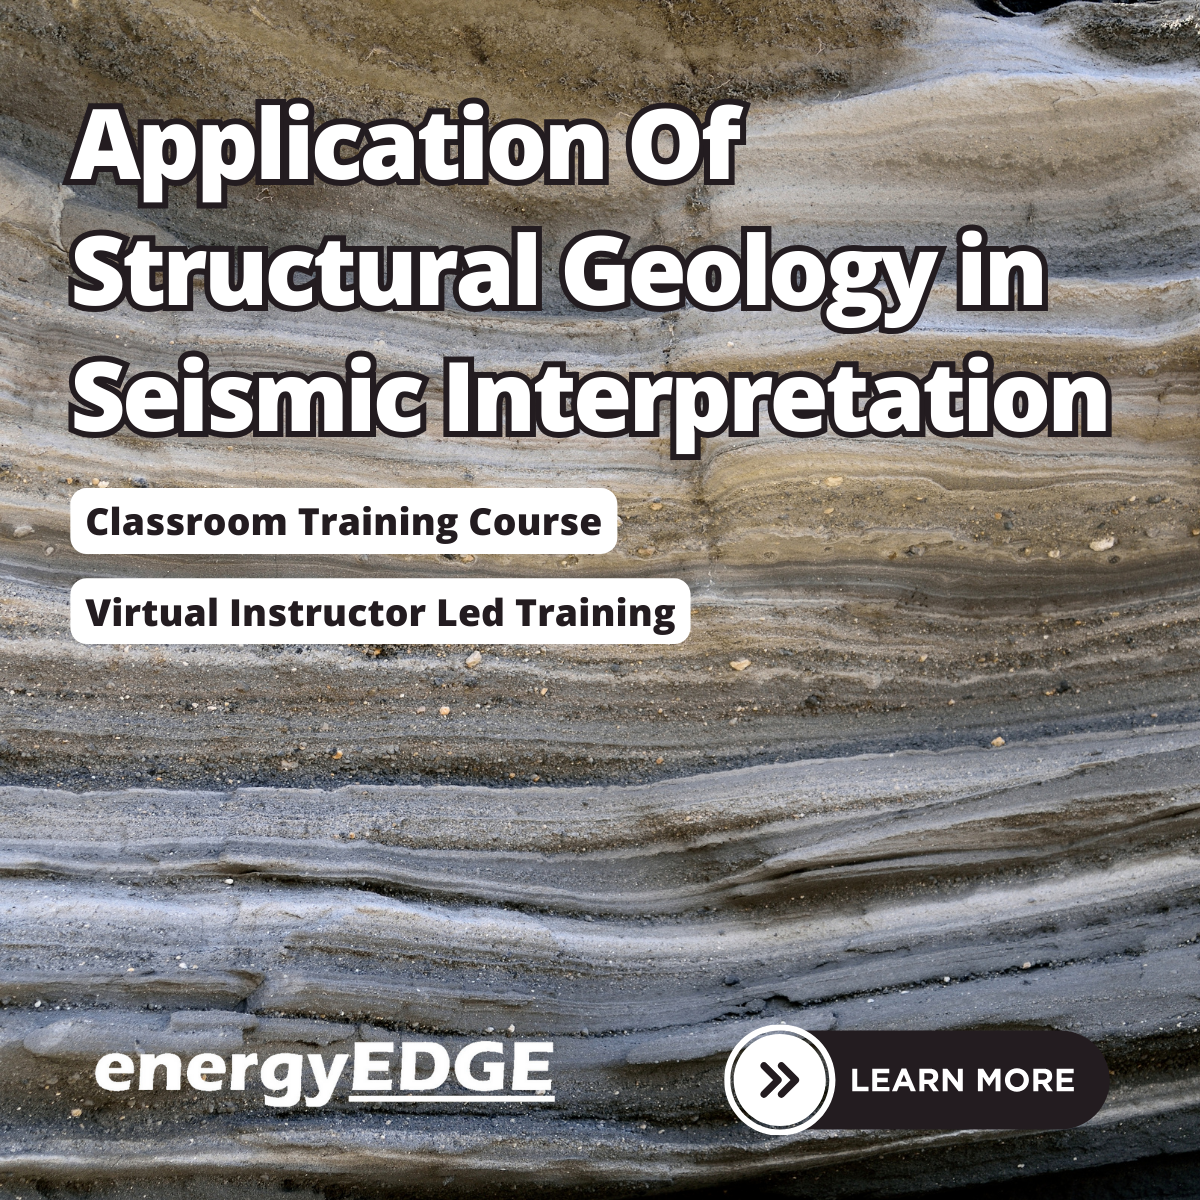 Application of Structural Geology in Seismic Interpretation